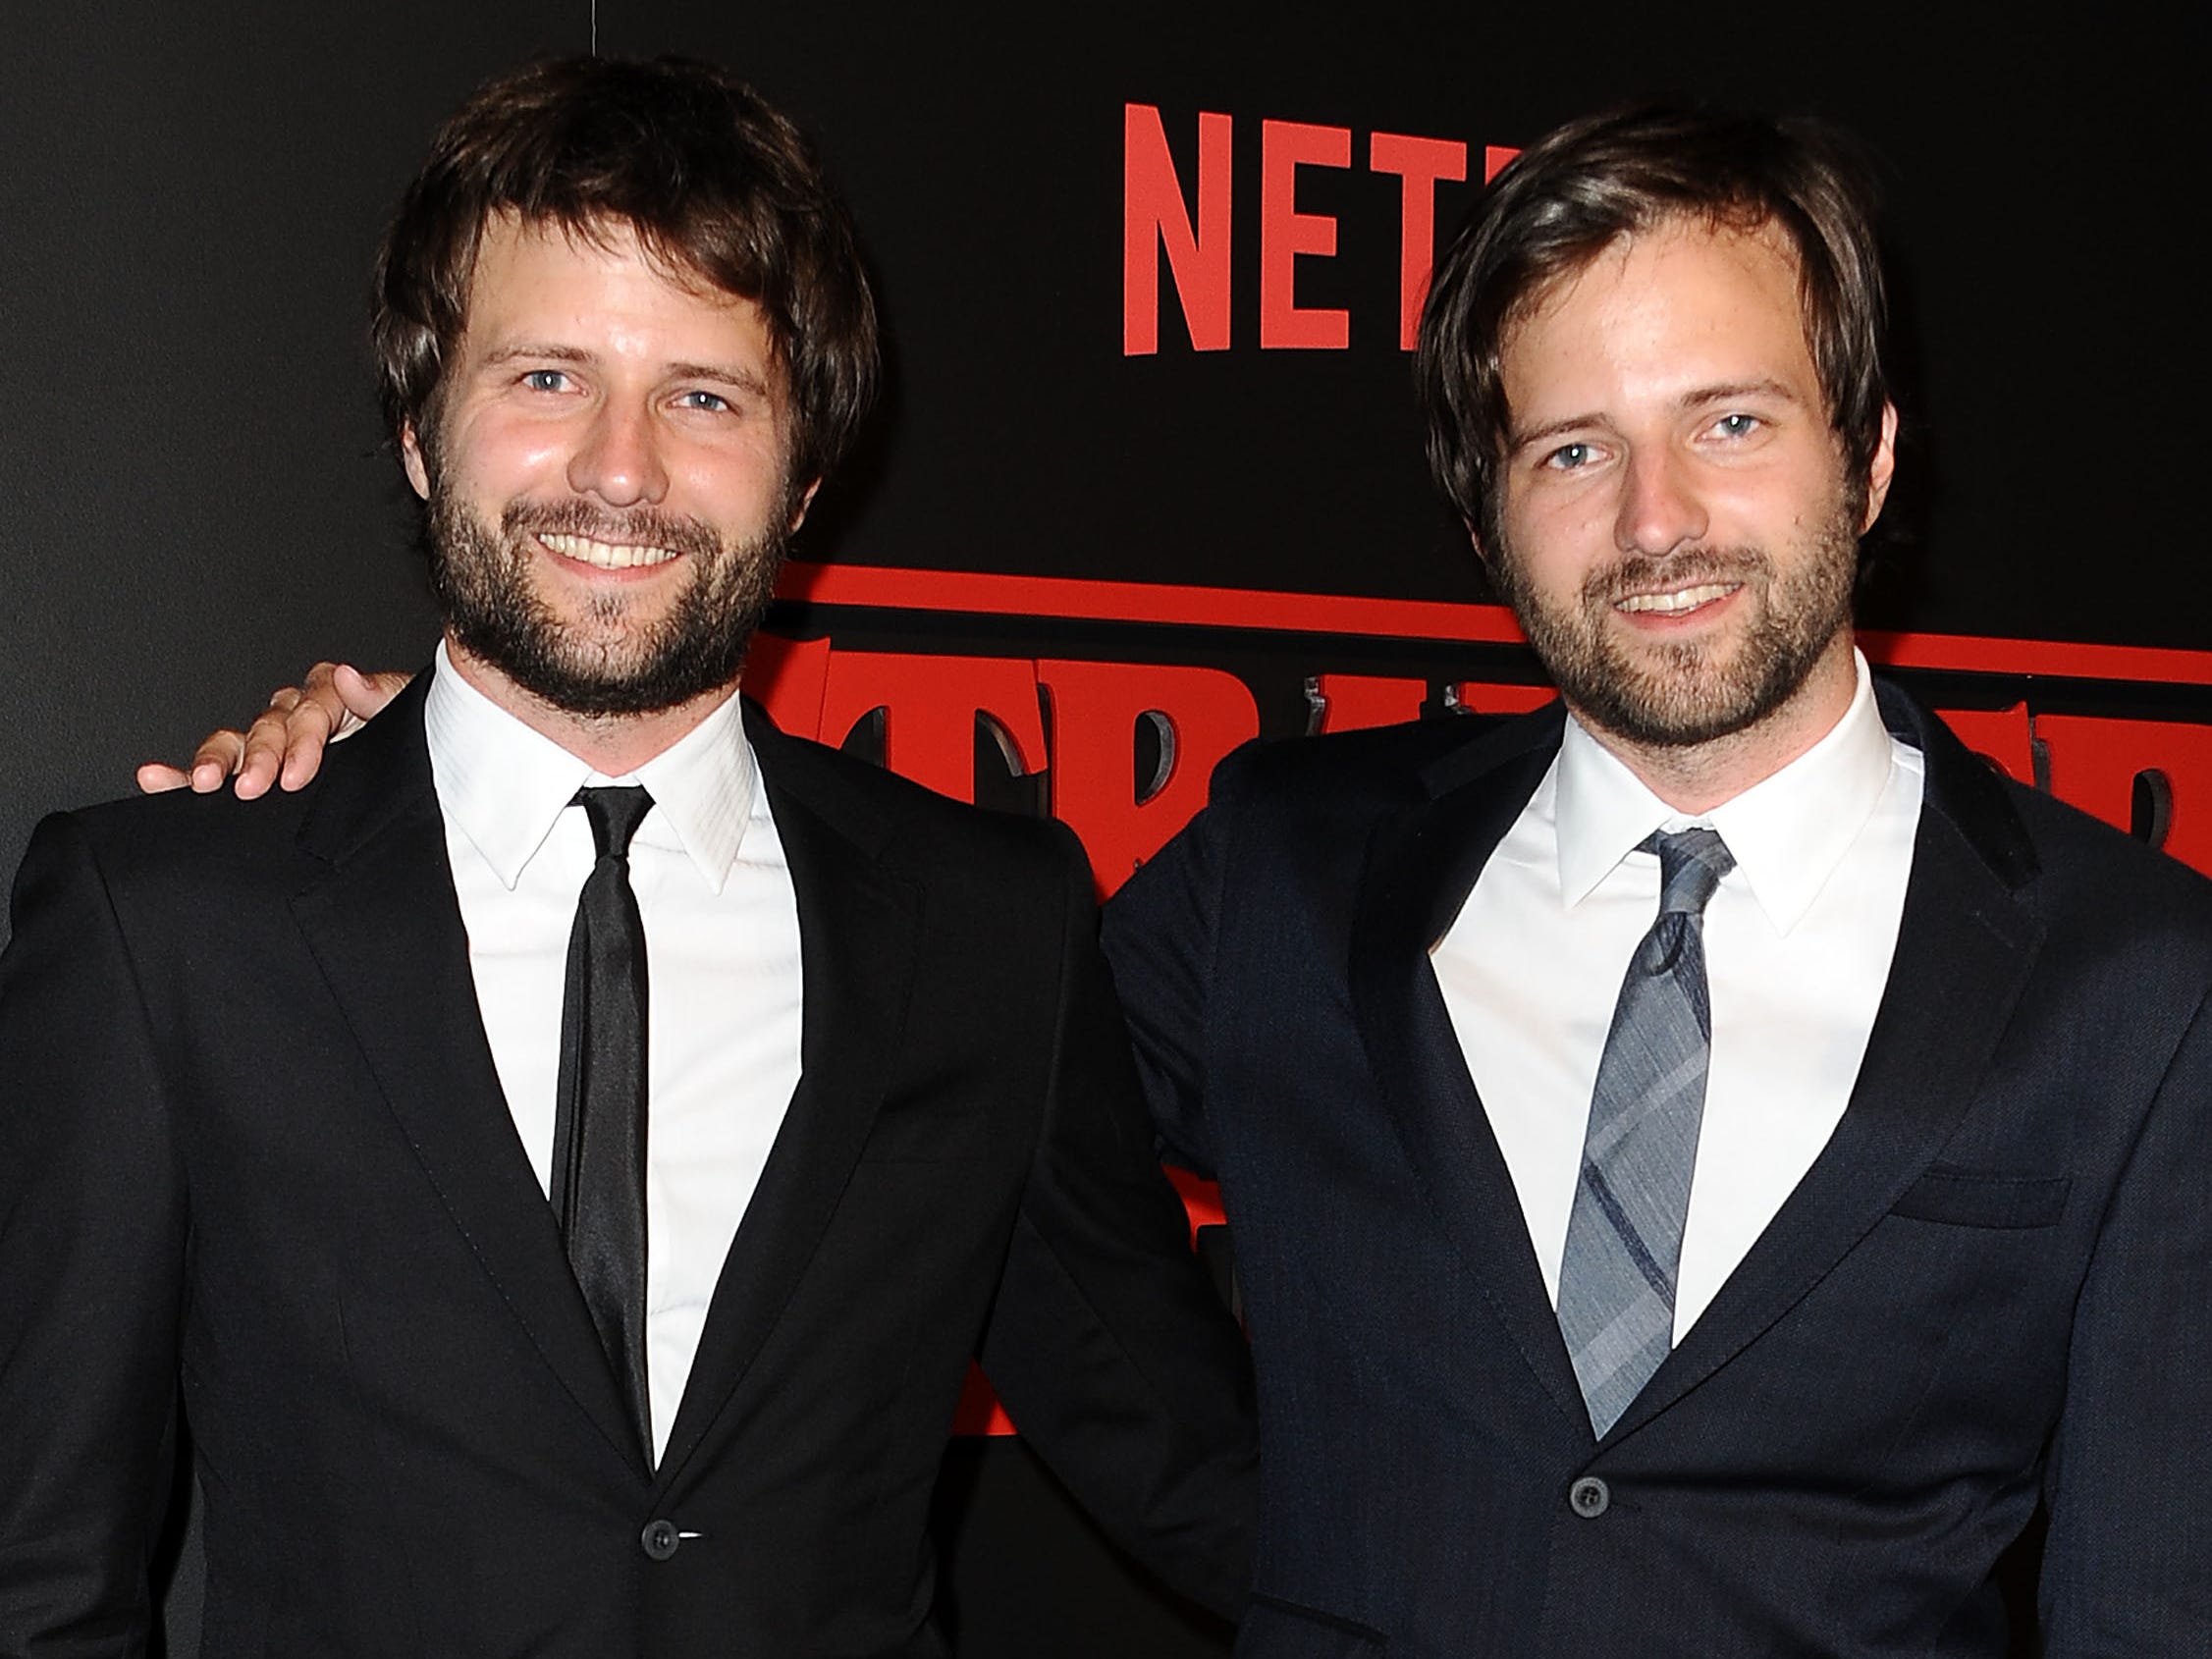 <p>In 2016, Matt and Ross Duffer confirmed to <a href="https://www.hollywoodreporter.com/tv/tv-news/duffer-brothers-talk-stranger-things-916180/">The Hollywood Reporter</a> that "Stranger Things" was originally sold as "Montauk" before they decided to switch the name and the location to the fictional town of Hawkins, Indiana.</p><p>"We liked Montauk, because we liked the coastal setting," Matt Duffer said, adding that Montauk is the basis for Amity Island, the fictional location of "Jaws," which is one of their favorite movies.</p><p>But the setting changed when they realized "it was really going to be impossible to shoot in or around Long Island in the wintertime," Matt Duffer continued.</p><p>A filmmaker, Charlie Kessler, sued the brothers in 2018, claiming they stole the idea of "Stranger Things" from his script "The Montauk Project," <a href="https://www.thrillist.com/entertainment/nation/stranger-things-duffers-lawsuit-montauk-project" rel="noopener">Thrillist reported.</a> The Duffers denied his claims, and Kessler dropped the lawsuit in 2019, <a href="https://www.hollywoodreporter.com/business/business-news/stranger-things-lawsuit-dropped-eve-trial-1207518/" rel="noopener">The Hollywood Reporter</a> reported.</p>